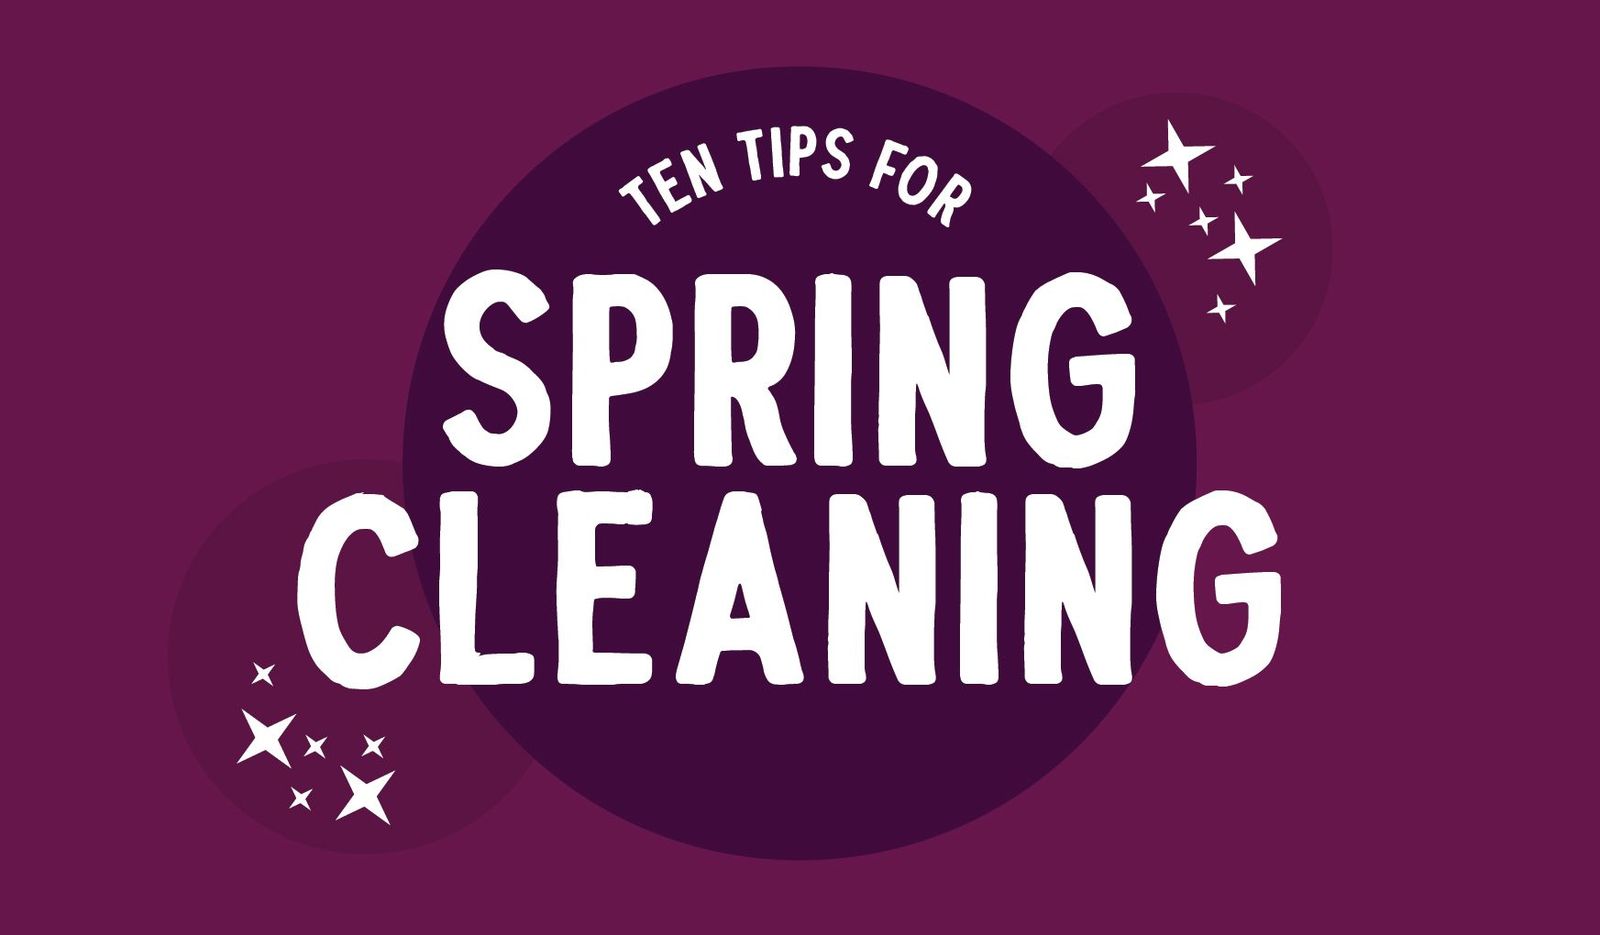 10 tips for spring cleaning your website